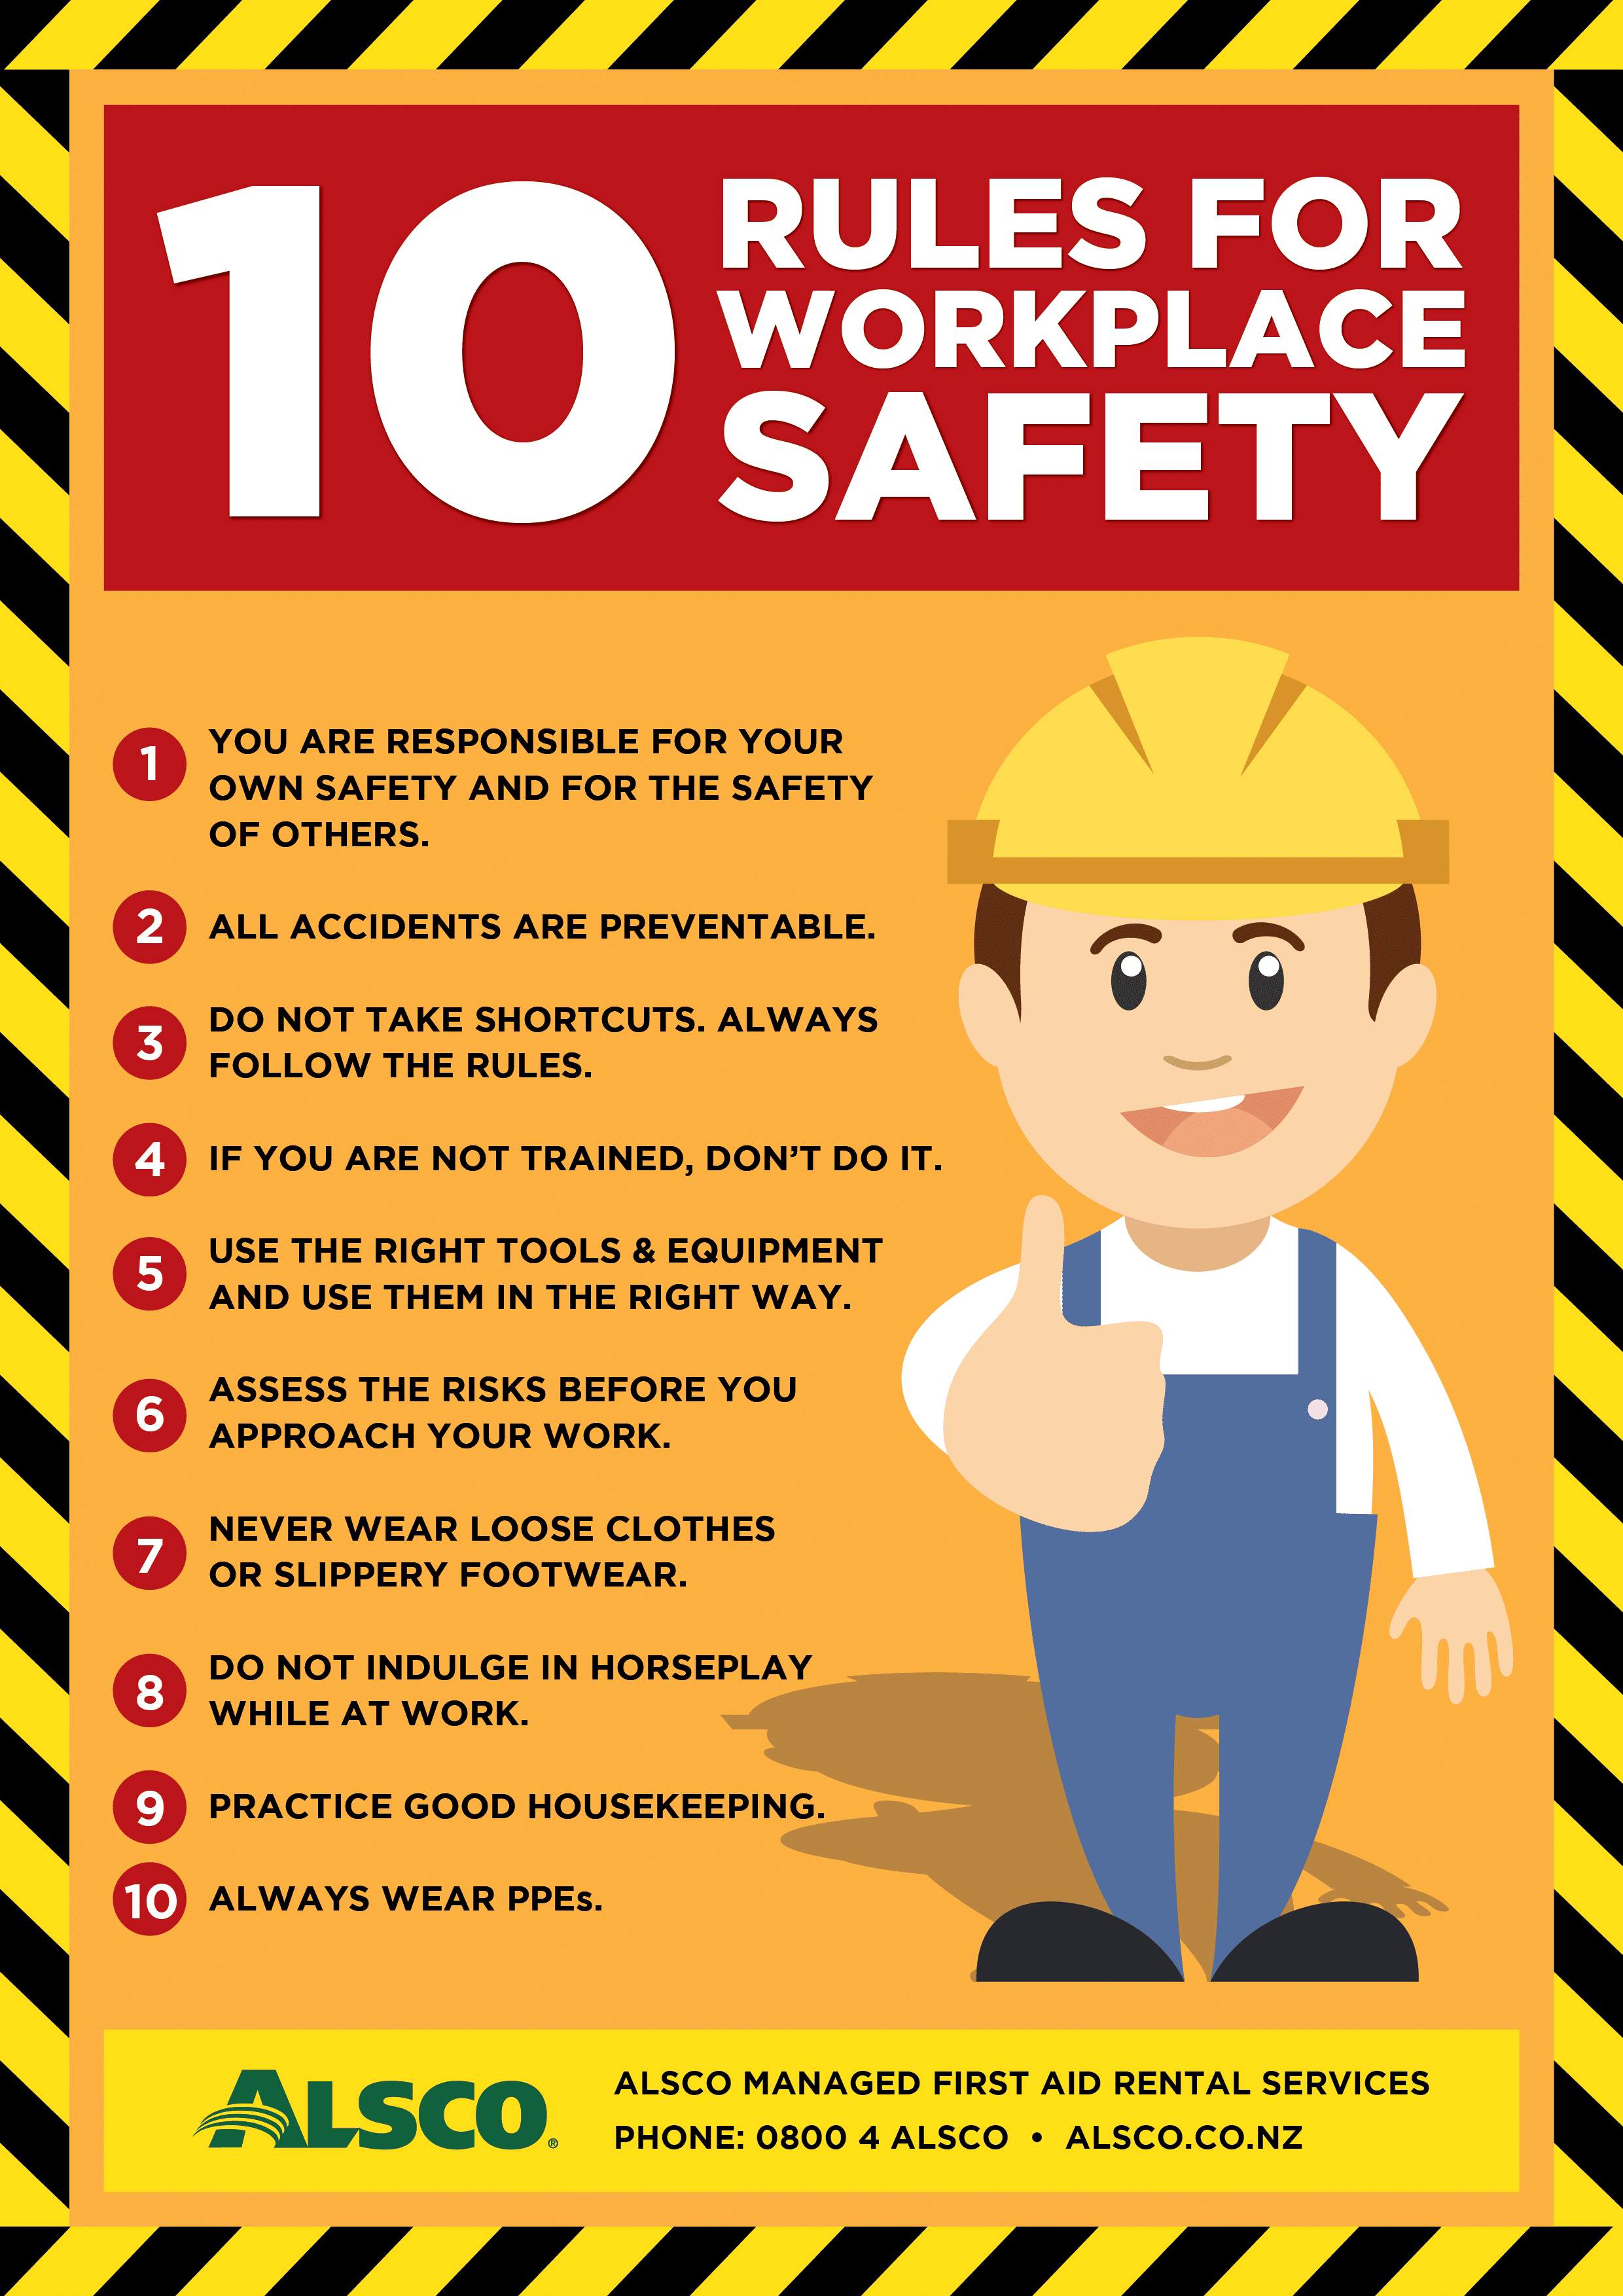 Description: C:Documents and SettingsSTUDENTDesktopAlsco-NZ-Training-Safety-Posters-rules-workplace-safety-A4.png